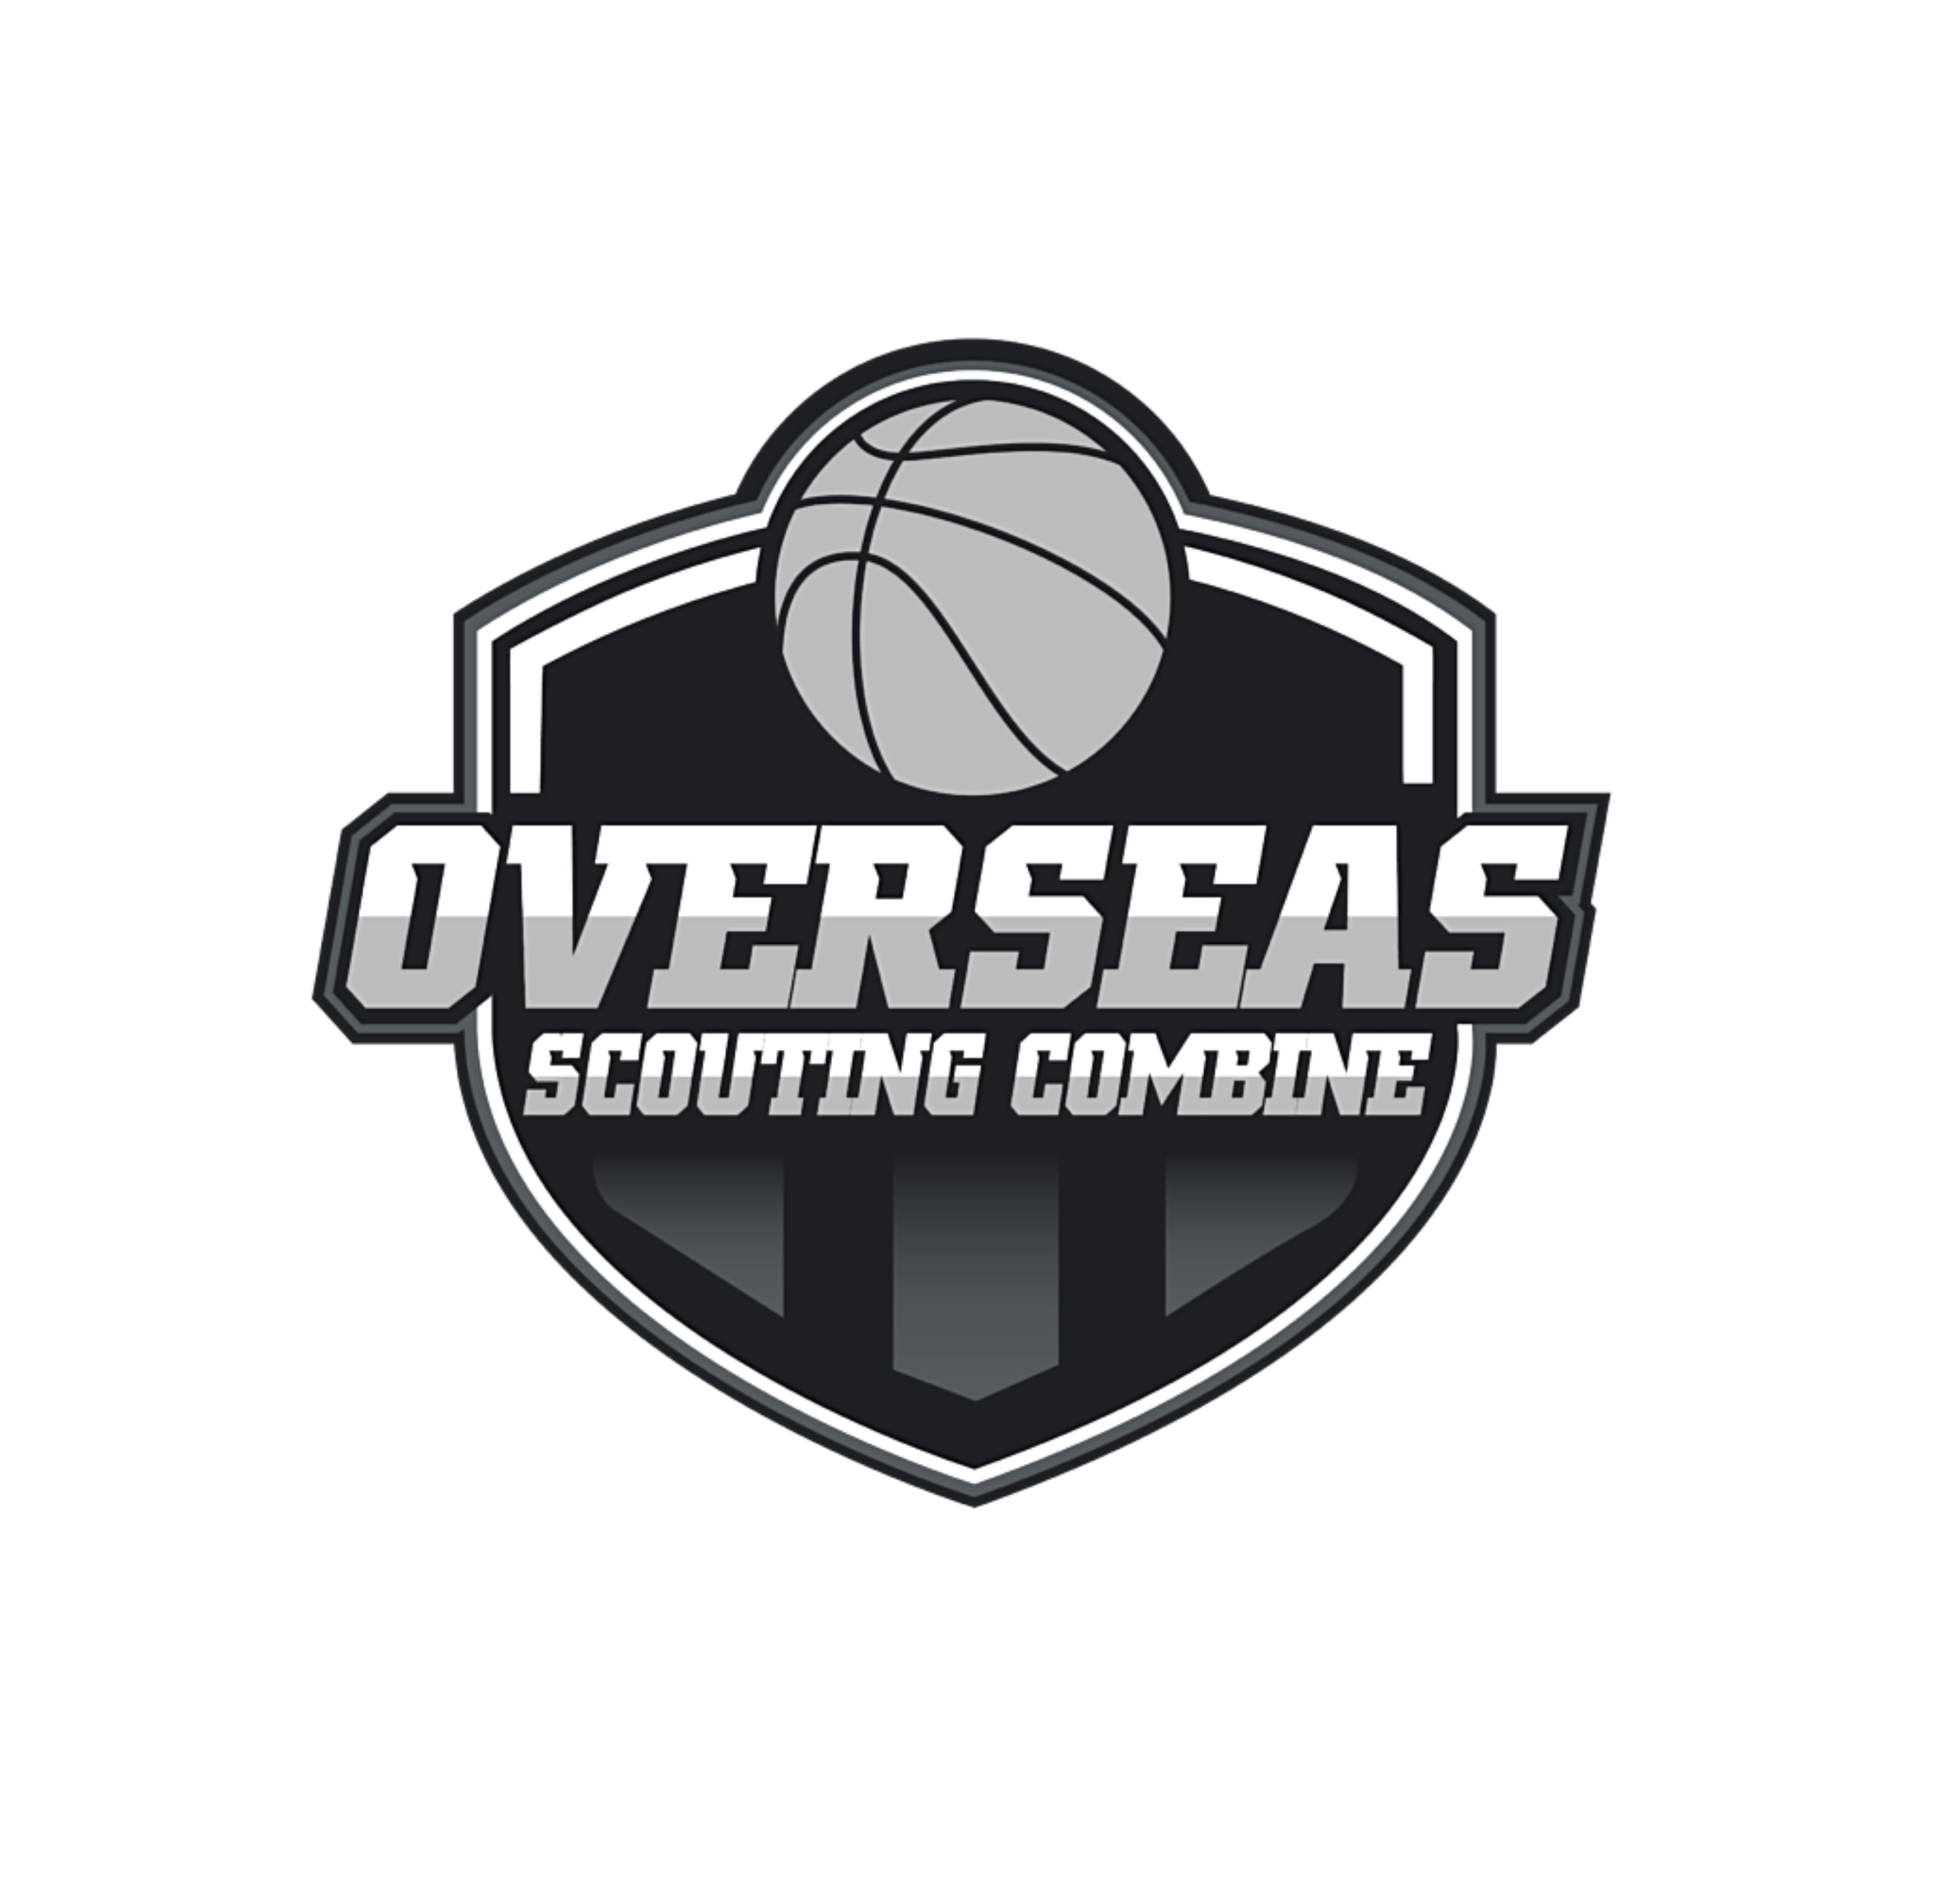 Overseas Basketball Scouting Combines are attended by Scouts, Coaches, Agents, and General Managers from Professional Basketball Leagues throughout the World.